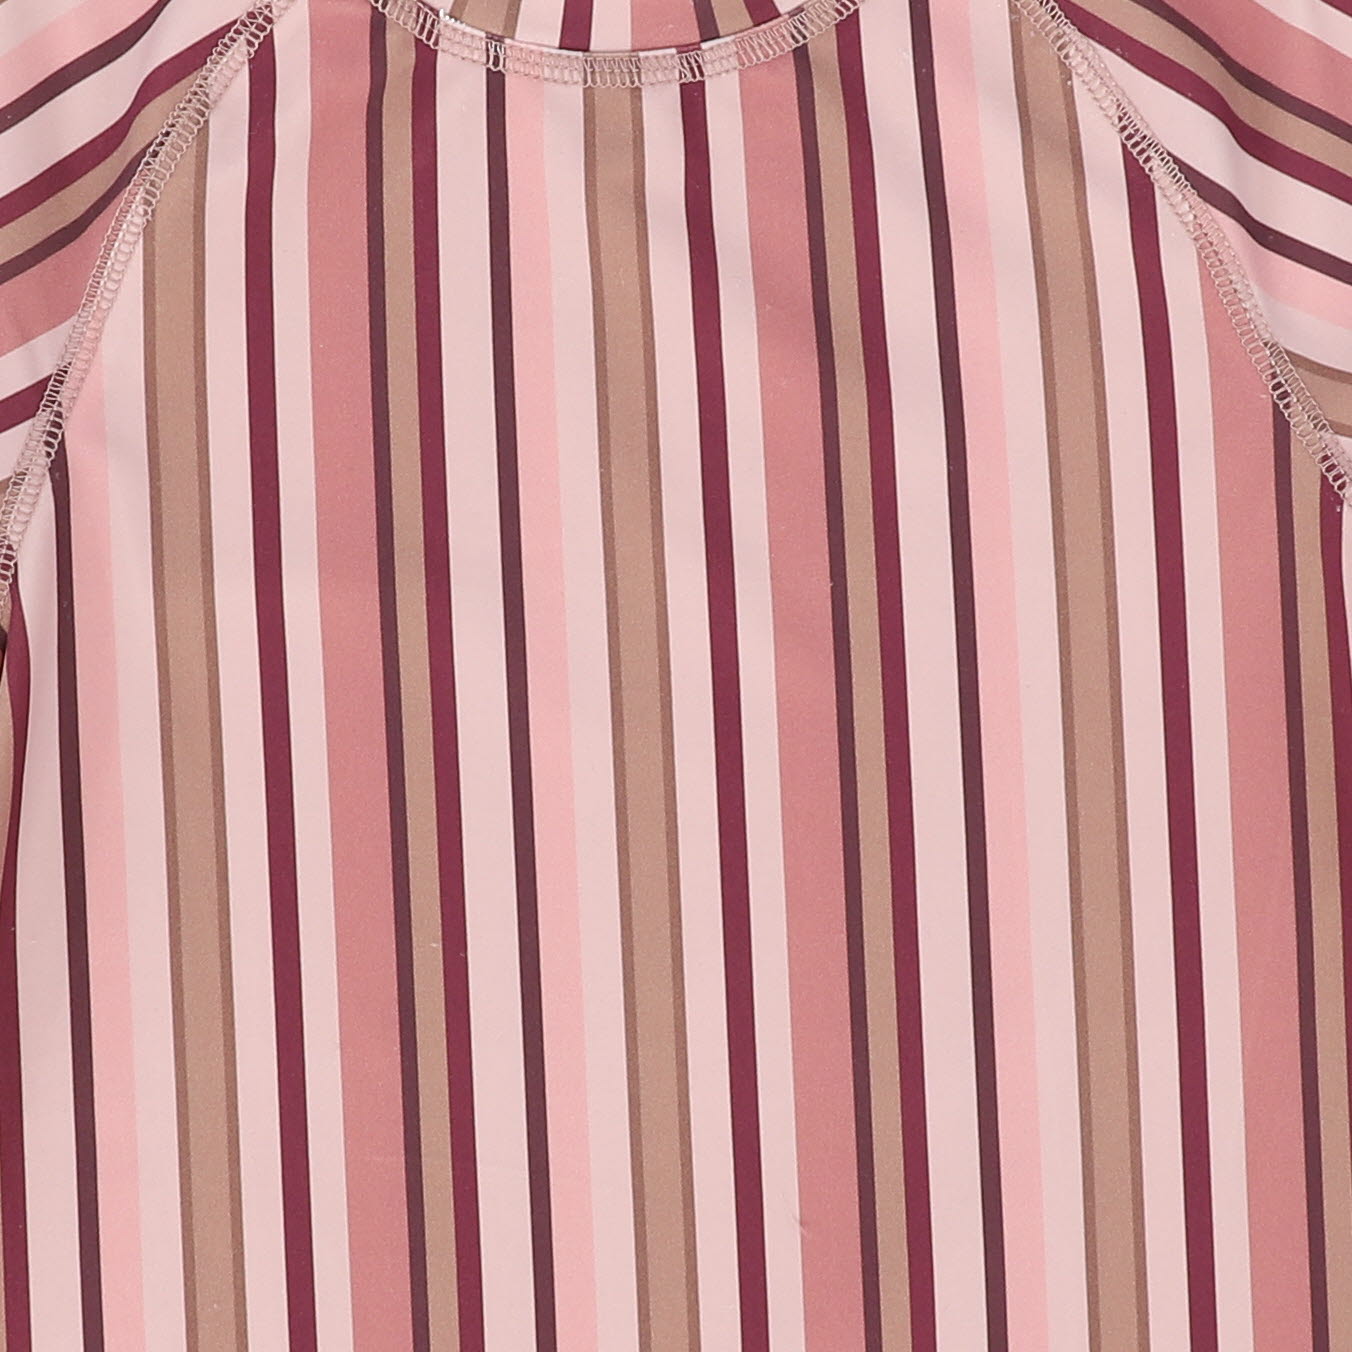 WATER CLUB BURGUNDY  STRIPED COVER UP [FINAL SALE]